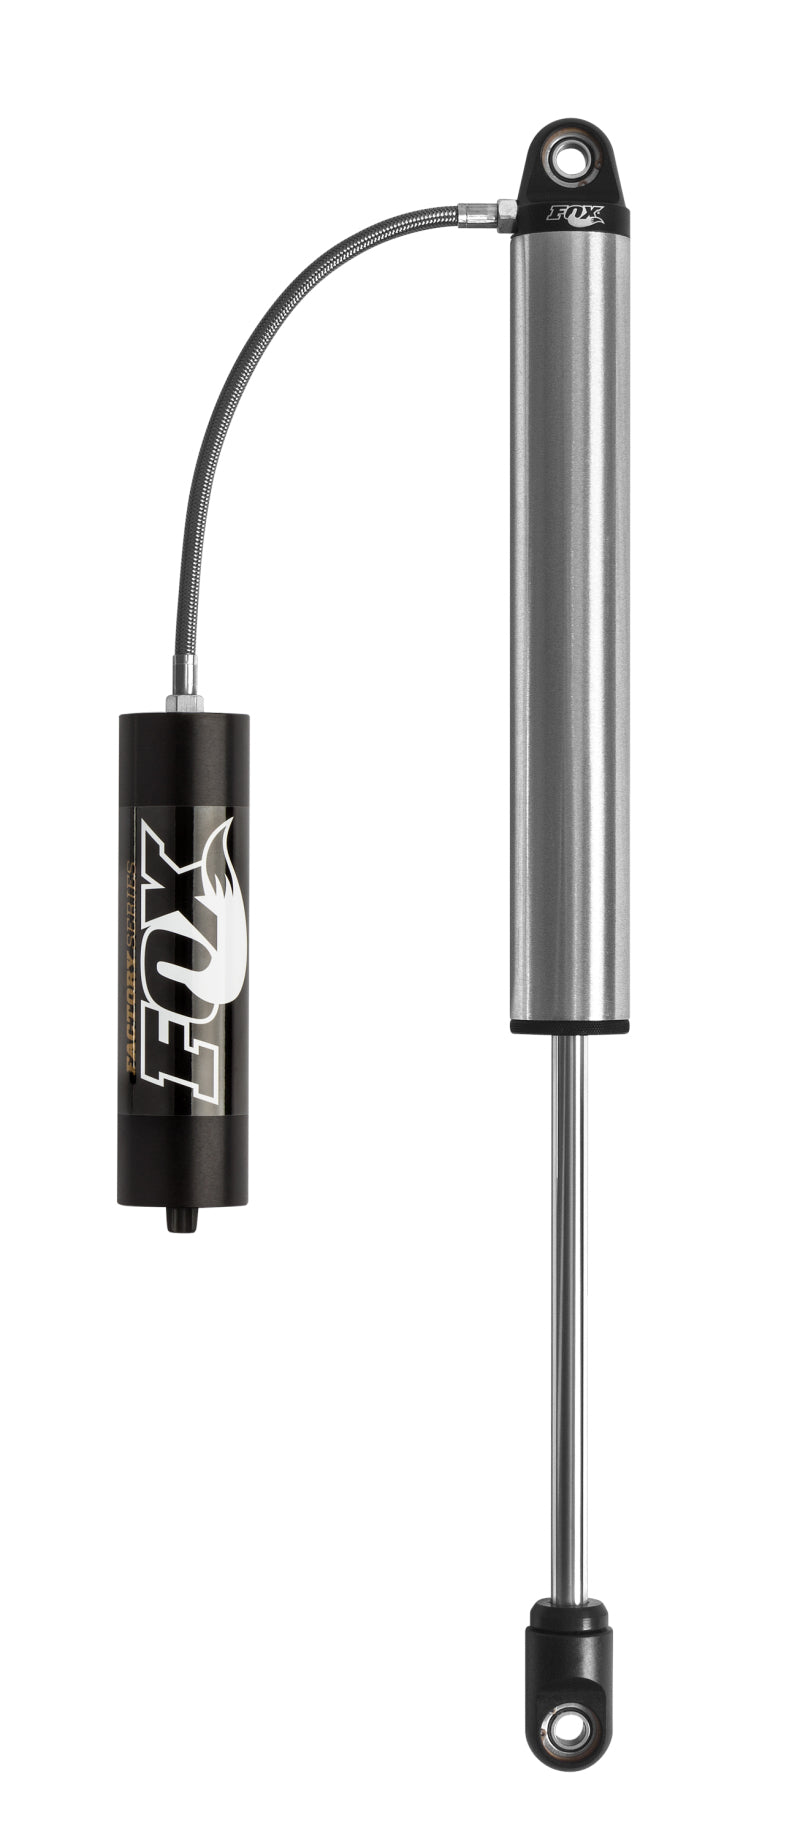 Fox 2.0 Factory Series 10in. Smooth Body Remote Reservoir Shock 5/8in. Shaft (30/90) - Blk